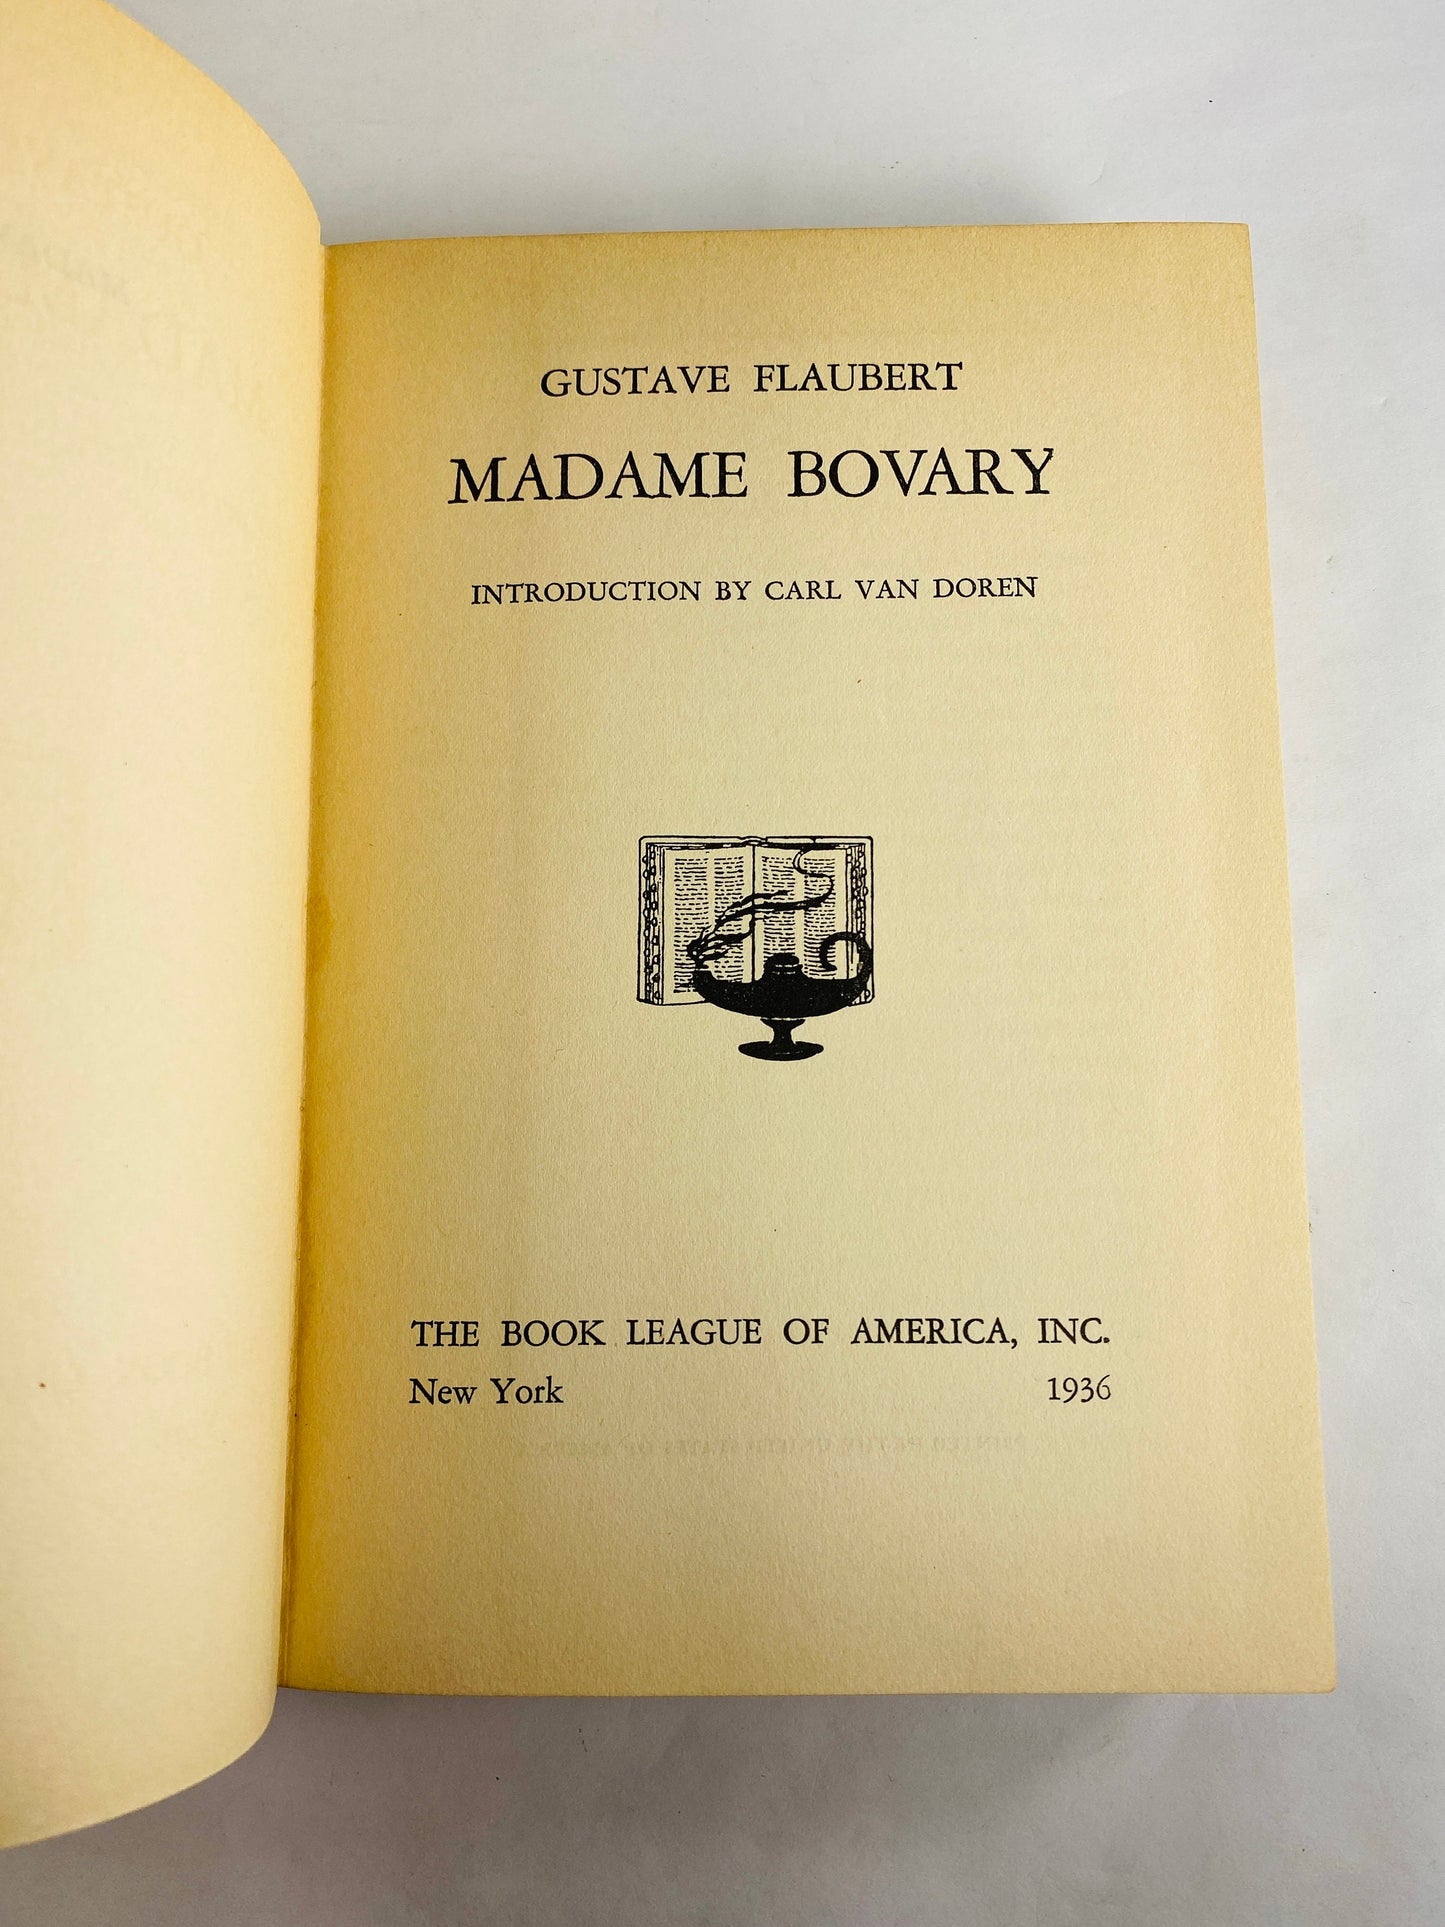 Madame Bovary by Gustave Falubert Beautiful blue vintage book circa 1936 embossed in gold Romantic wedding or engagement gift